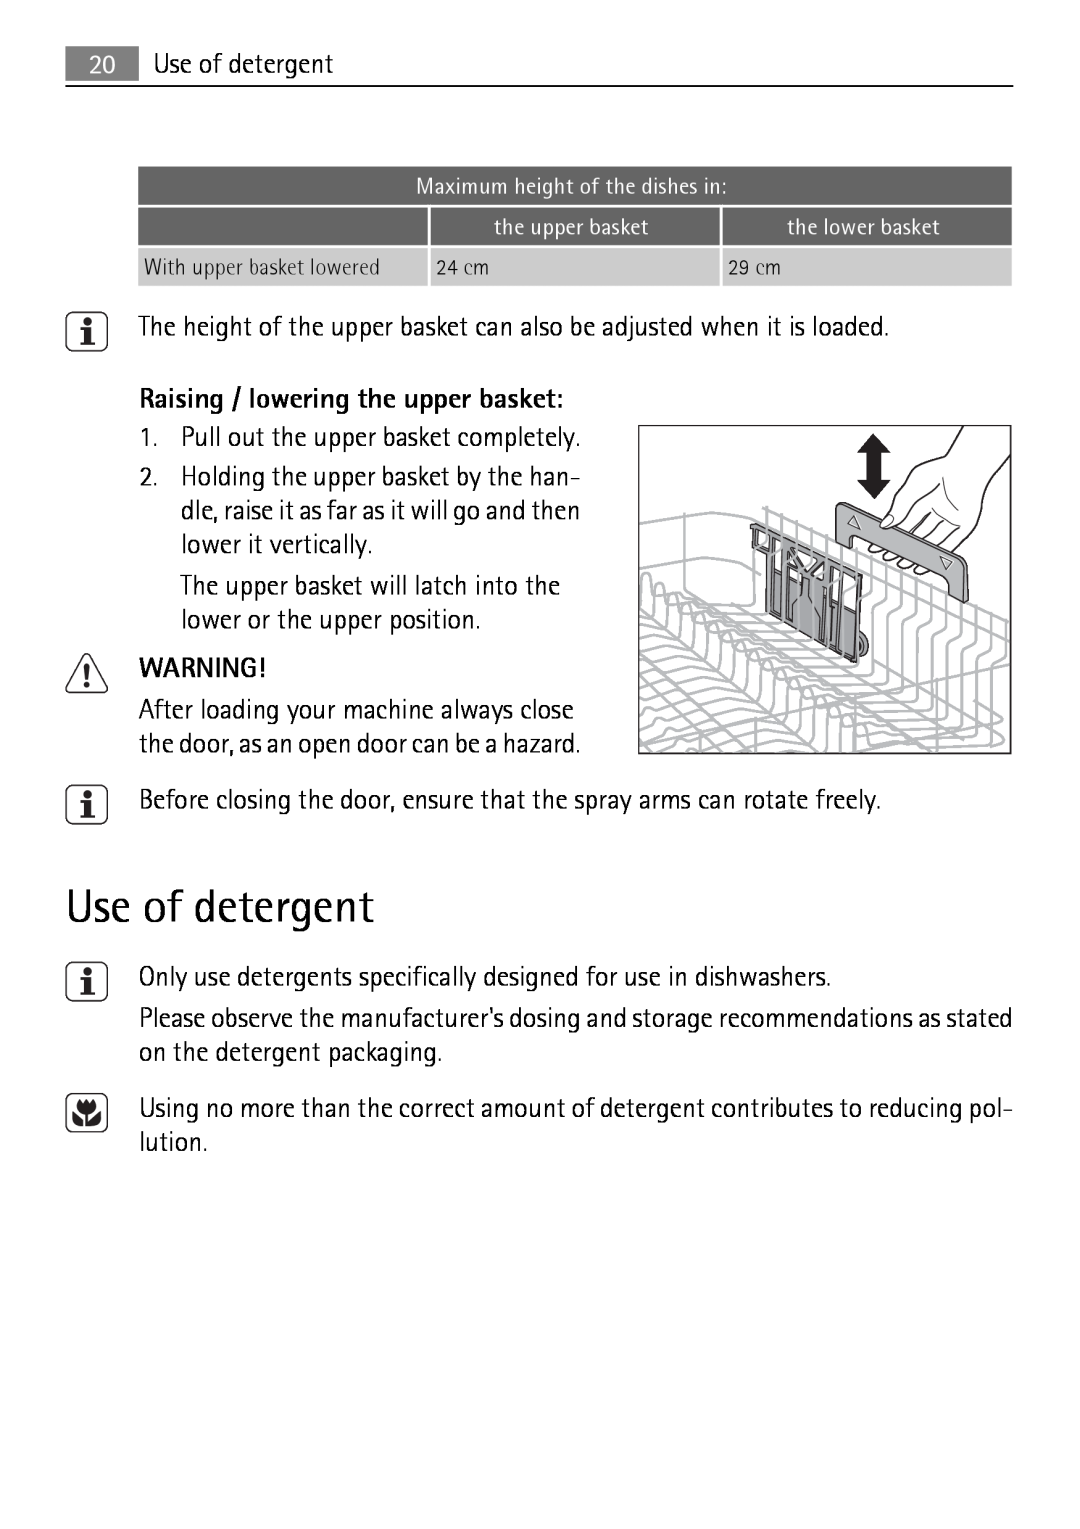 Electrolux 50870 user manual Use of detergent, Raising / lowering the upper basket 